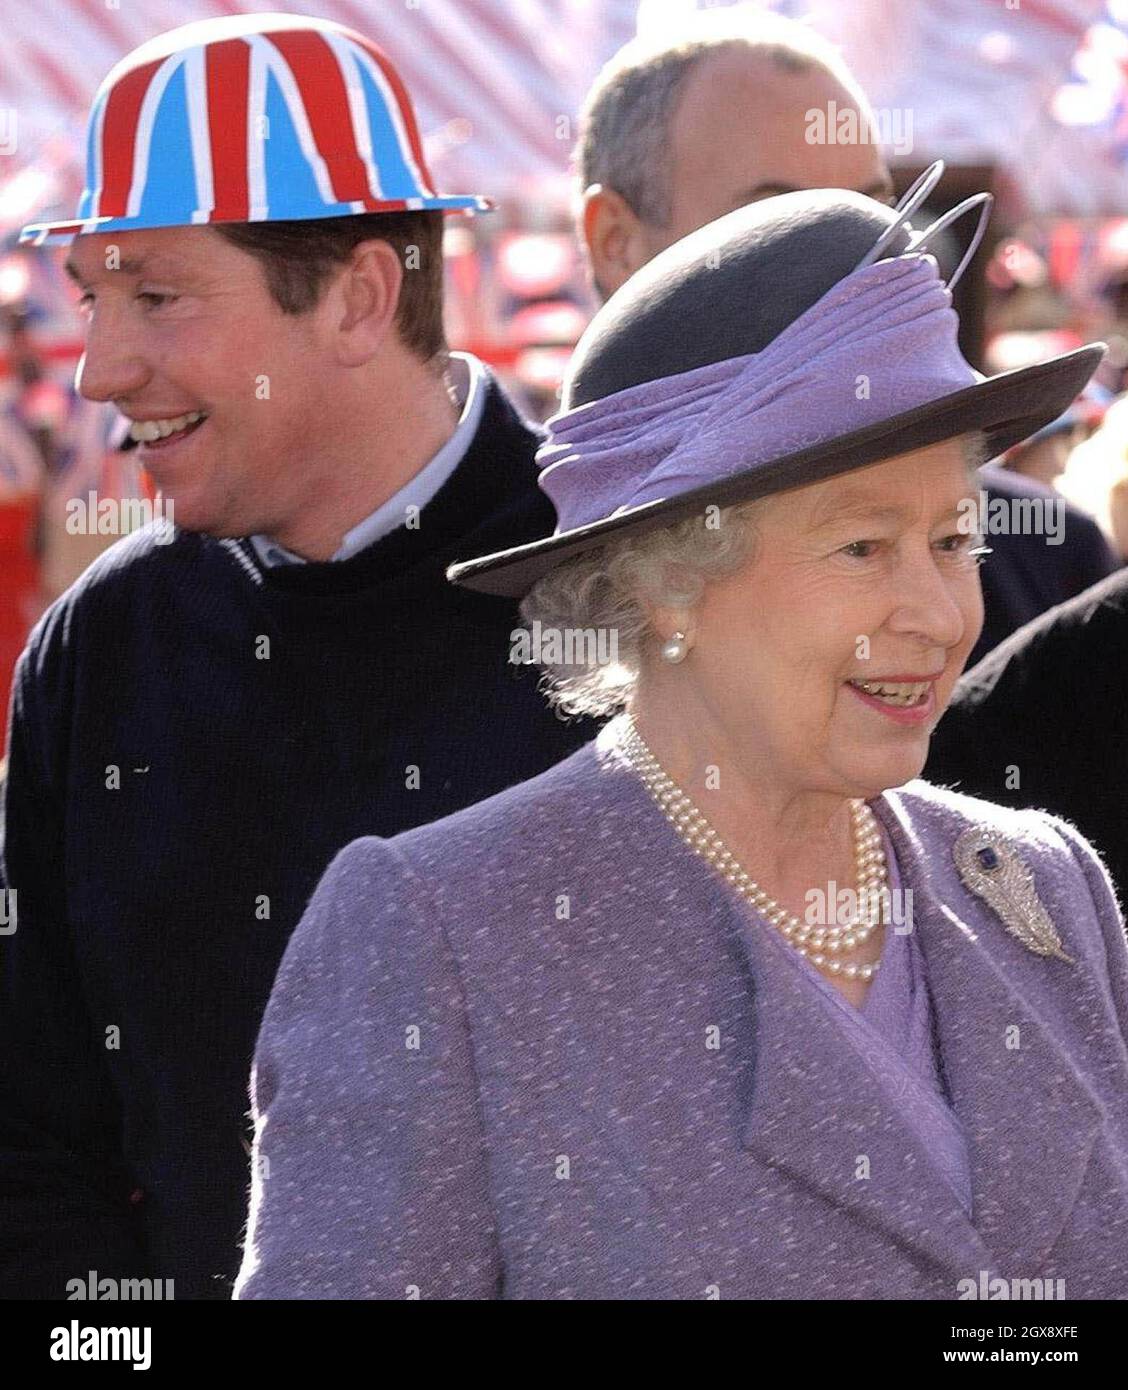 The Queen meets well wishers during a walkabout in the market square, Romford, Thursday March 6, 2003. The Queen, who has travelled the globe visiting some of the world's most famous destinations, has never before visited the area, famous for Cockney rhyming slang and its East End connections.  Head shot, royals, hat, union jack.  Â©Anwar Hussein/allaction.co.uk  Stock Photo